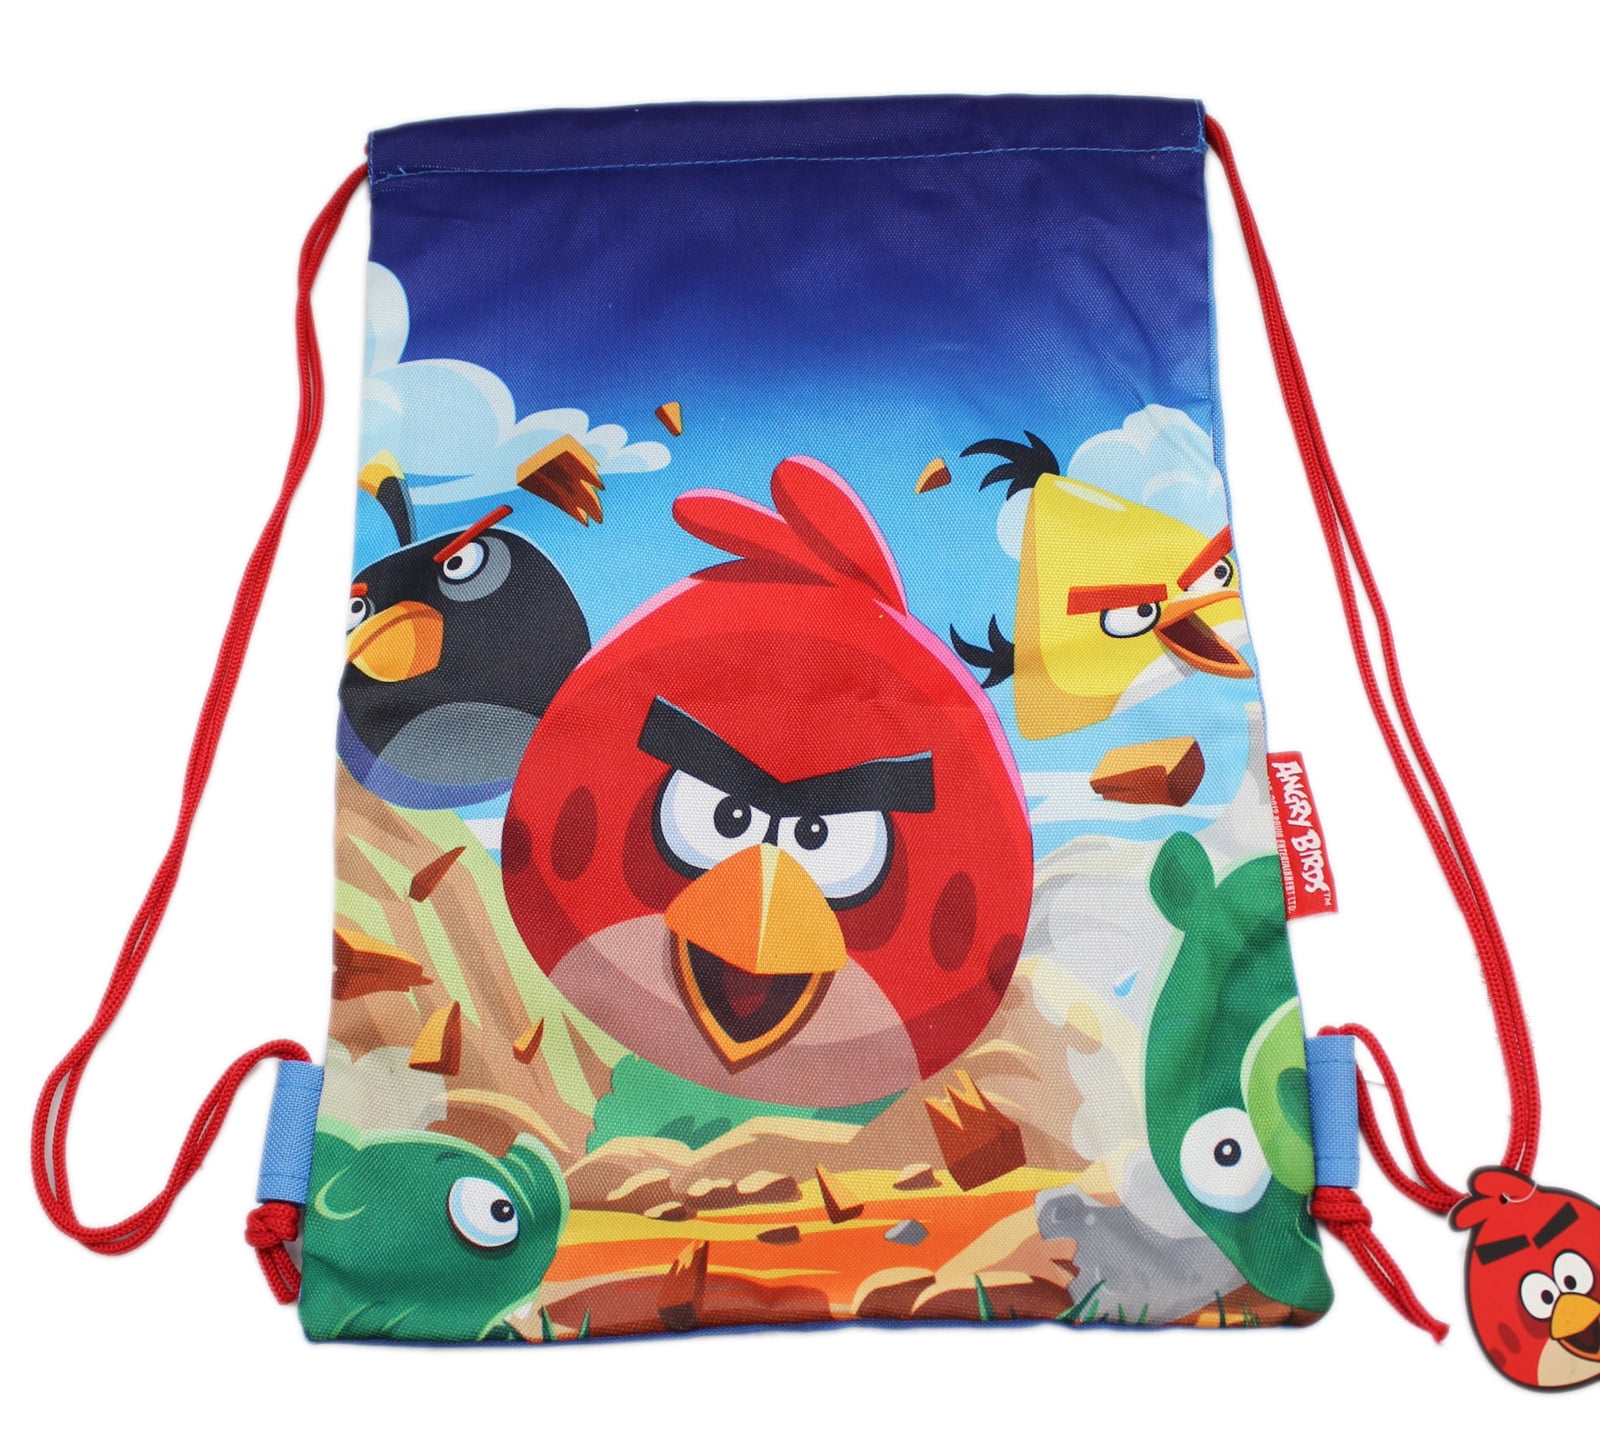 New Commonwealth Toy & Novelty Co. Red Bird Angry Birds Plush Backpack Clip